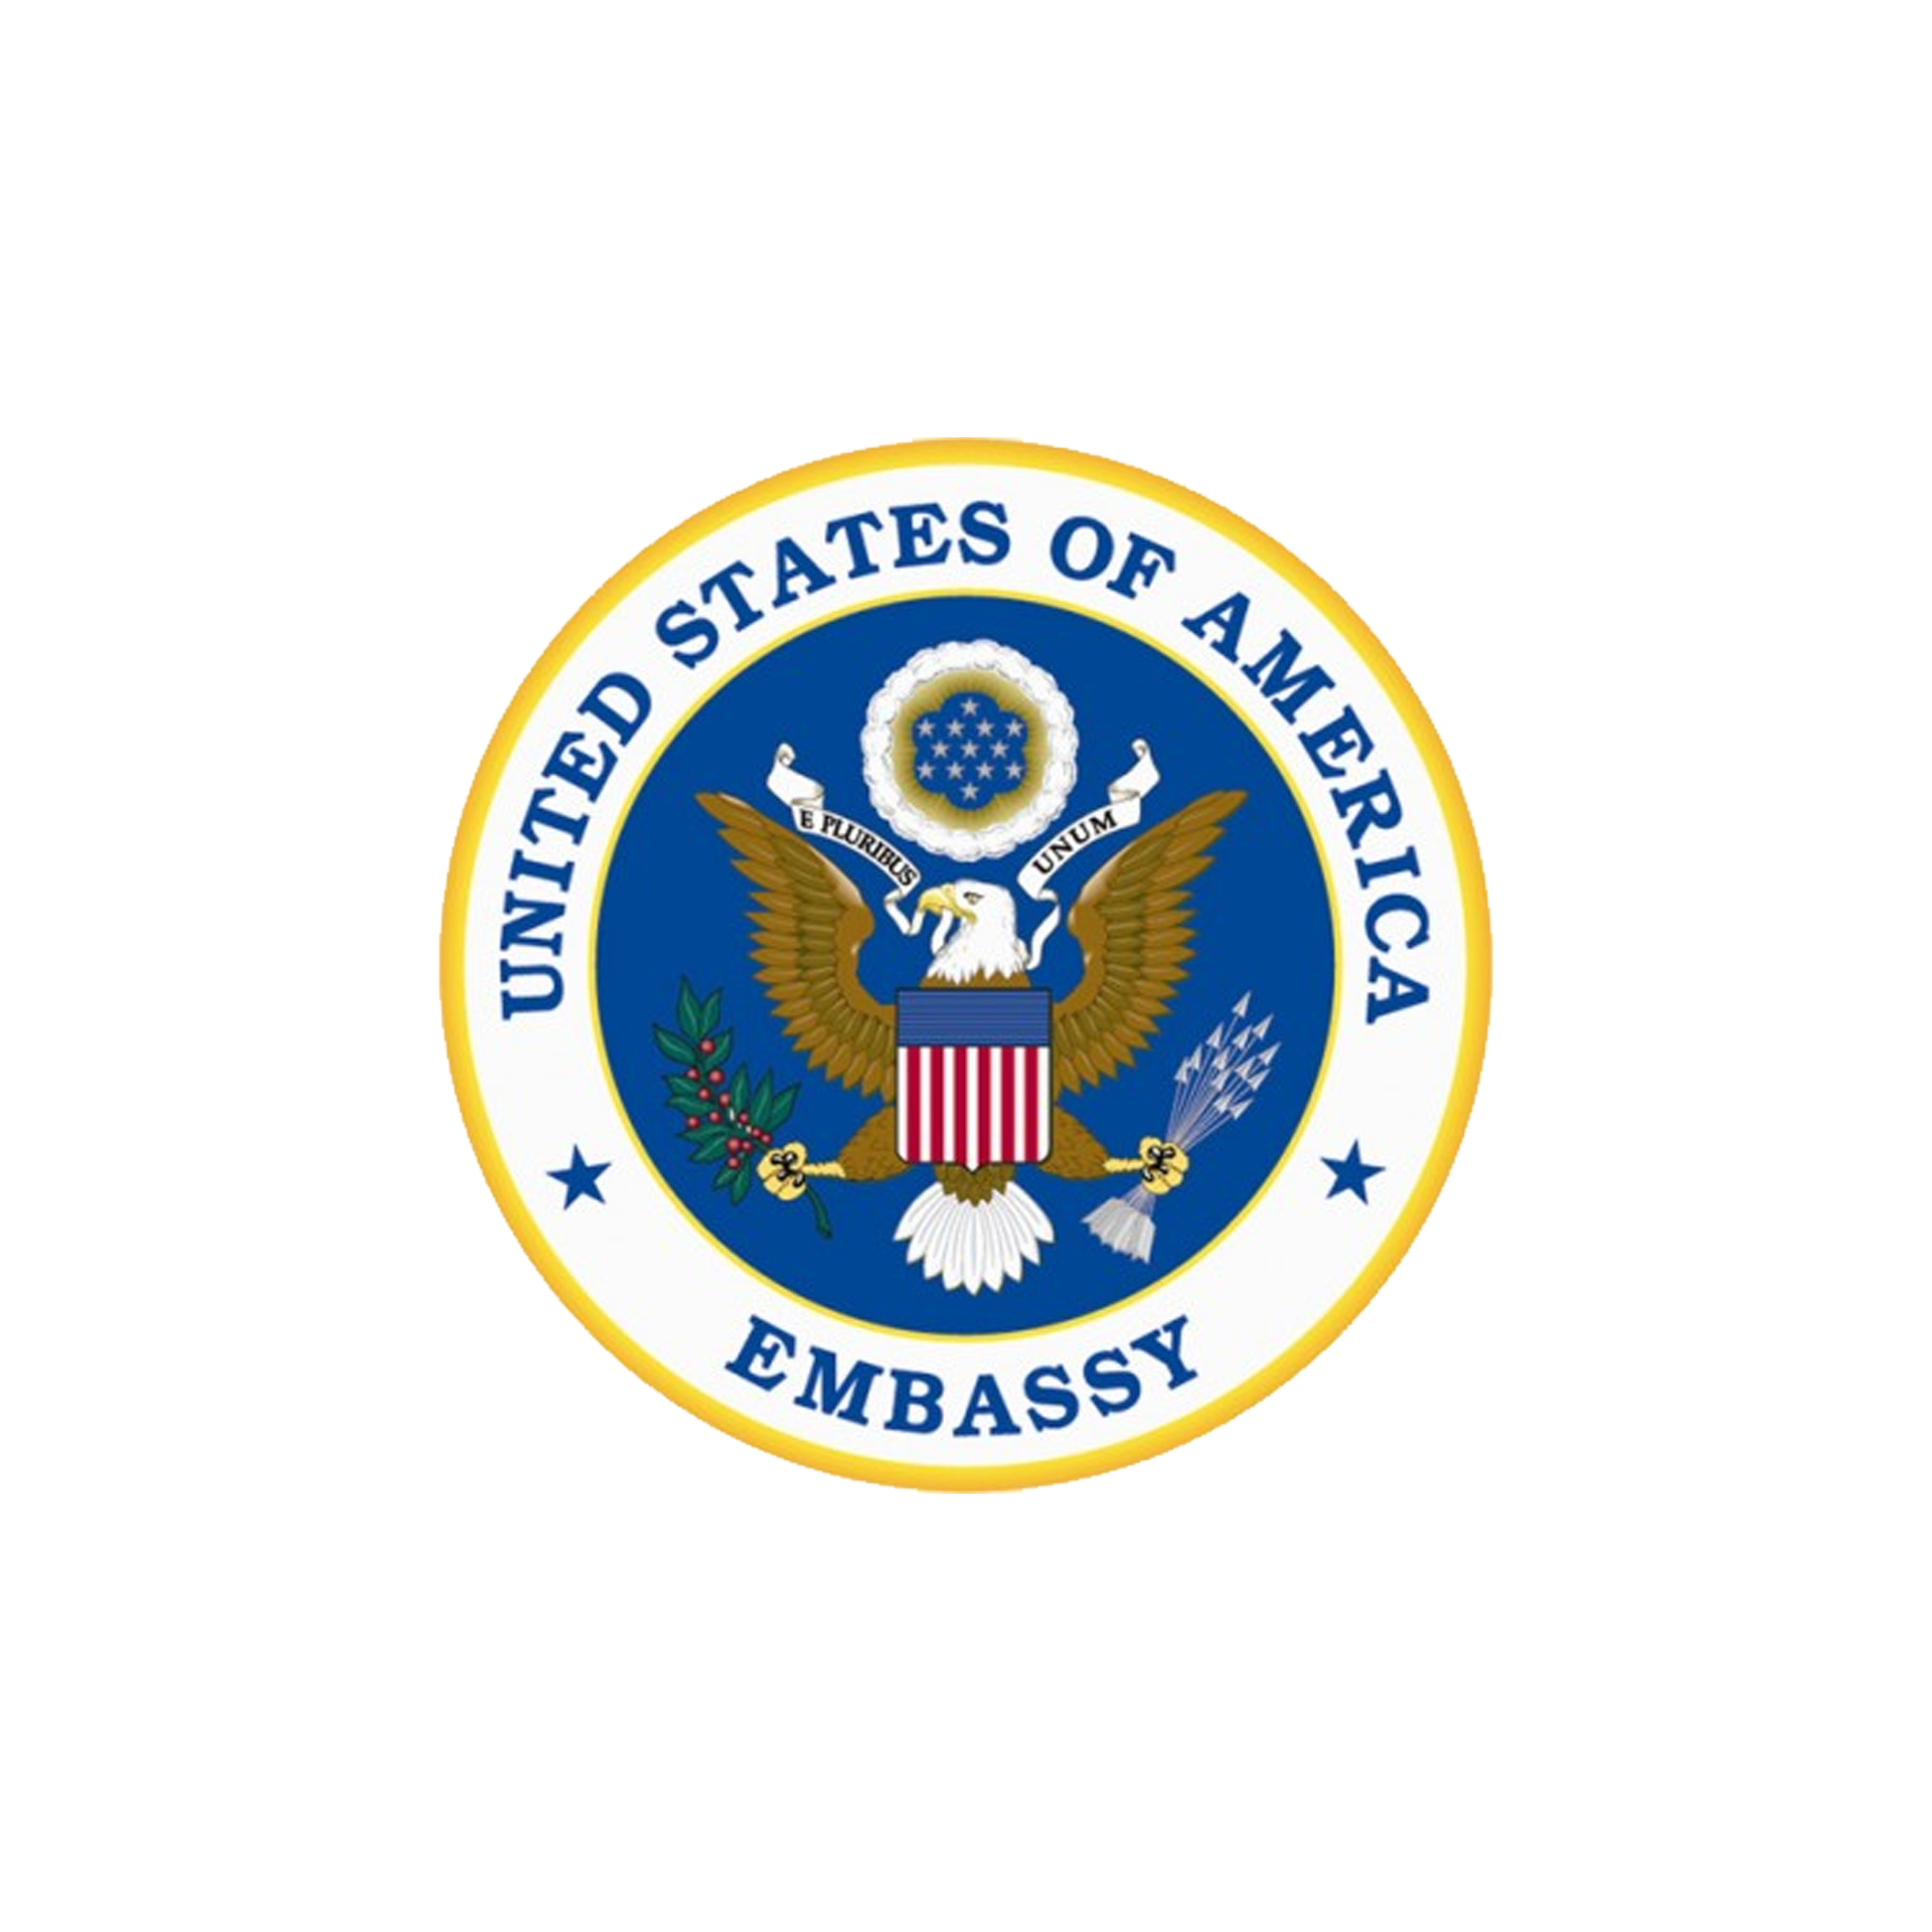 Image containing the logo of United States of America Embassy